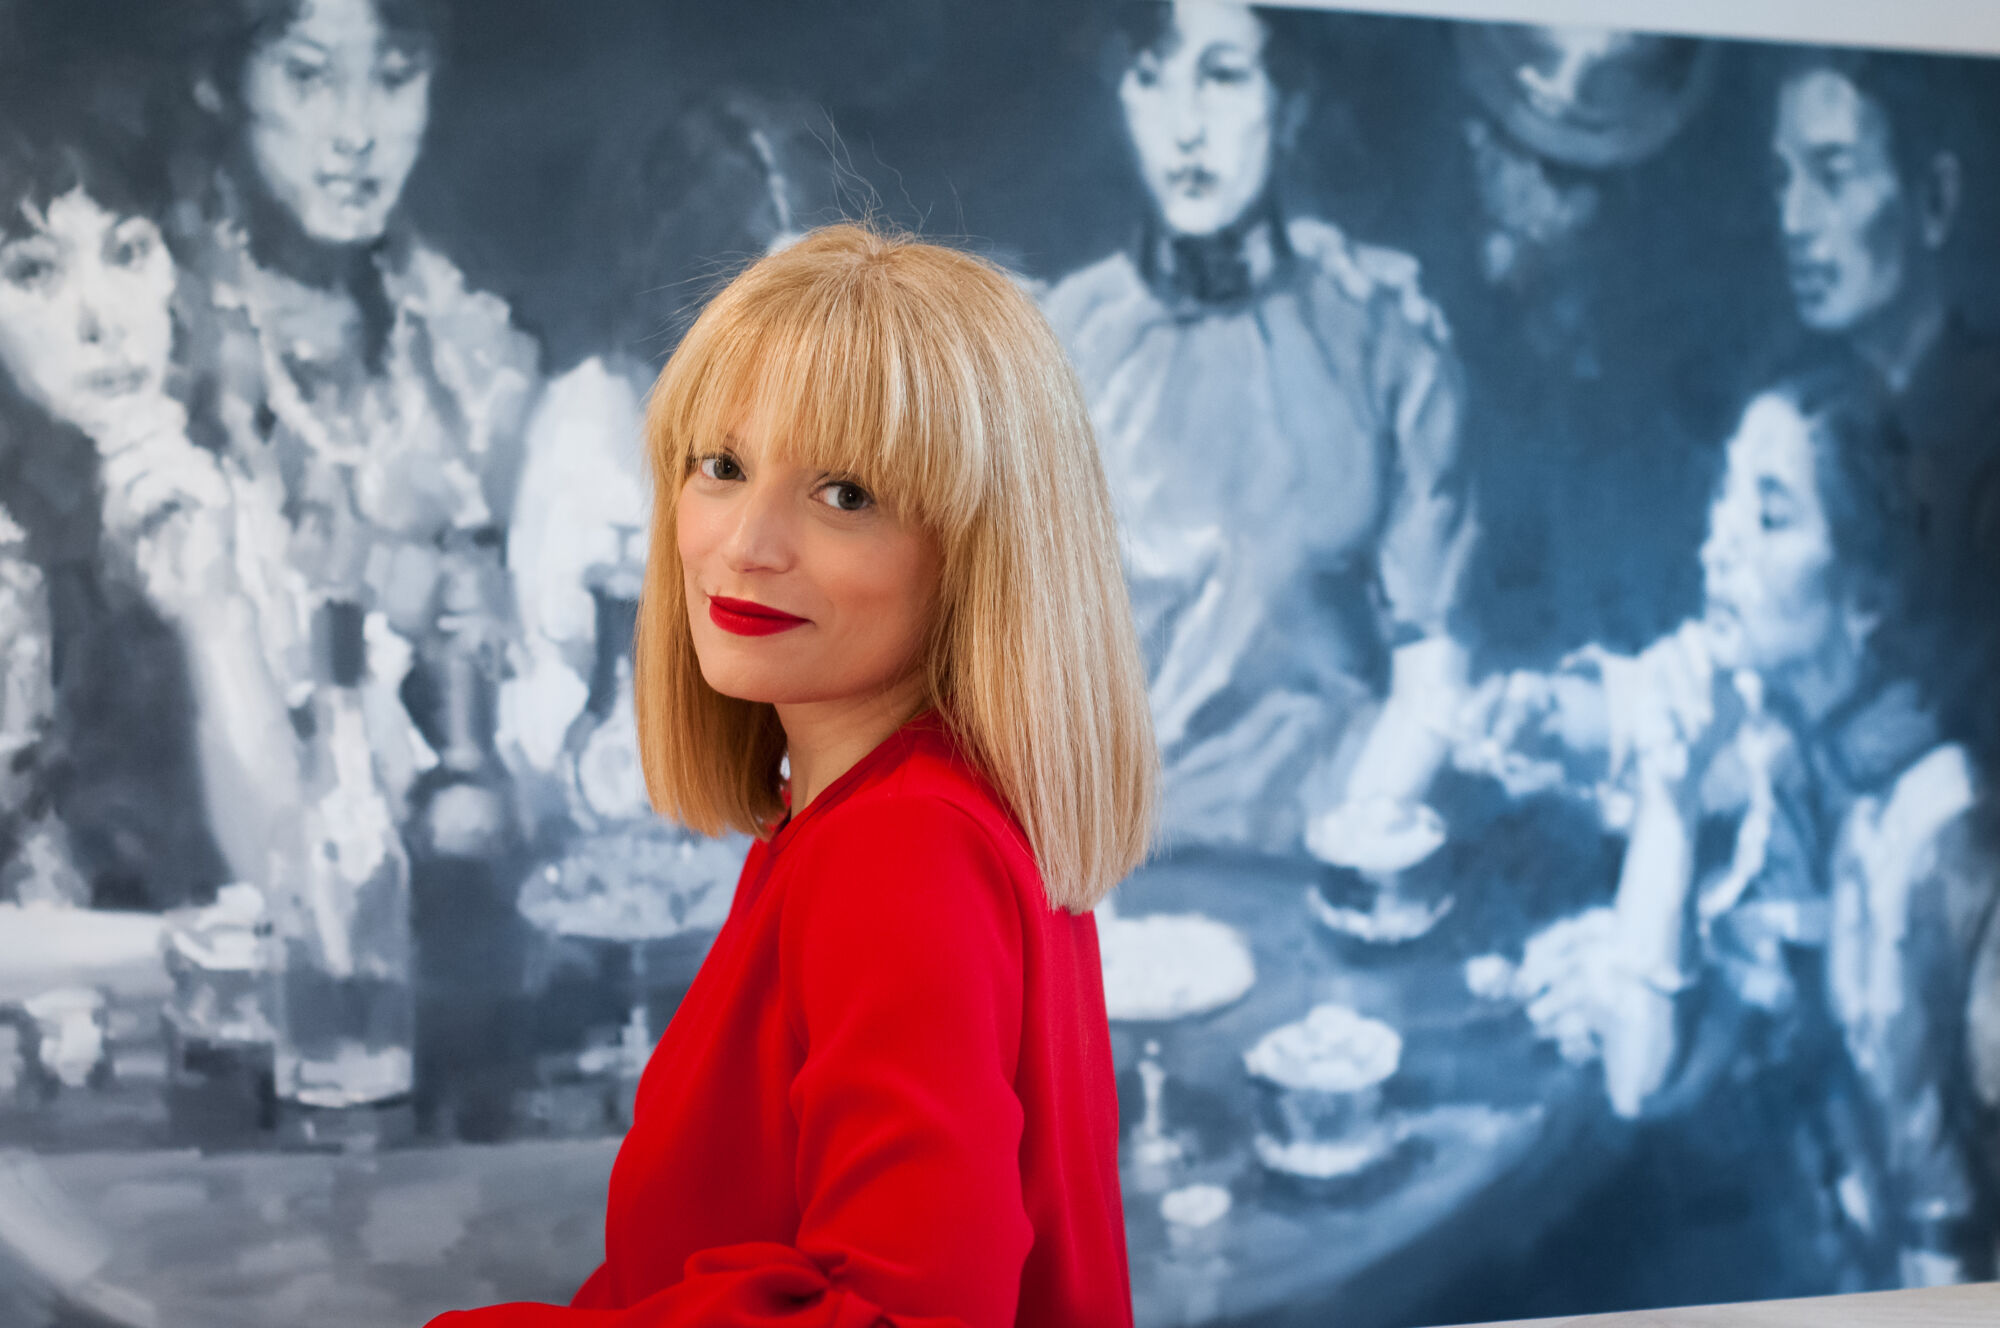 The Wick - Interview Film Producer and Art Collector Gisele Phillips